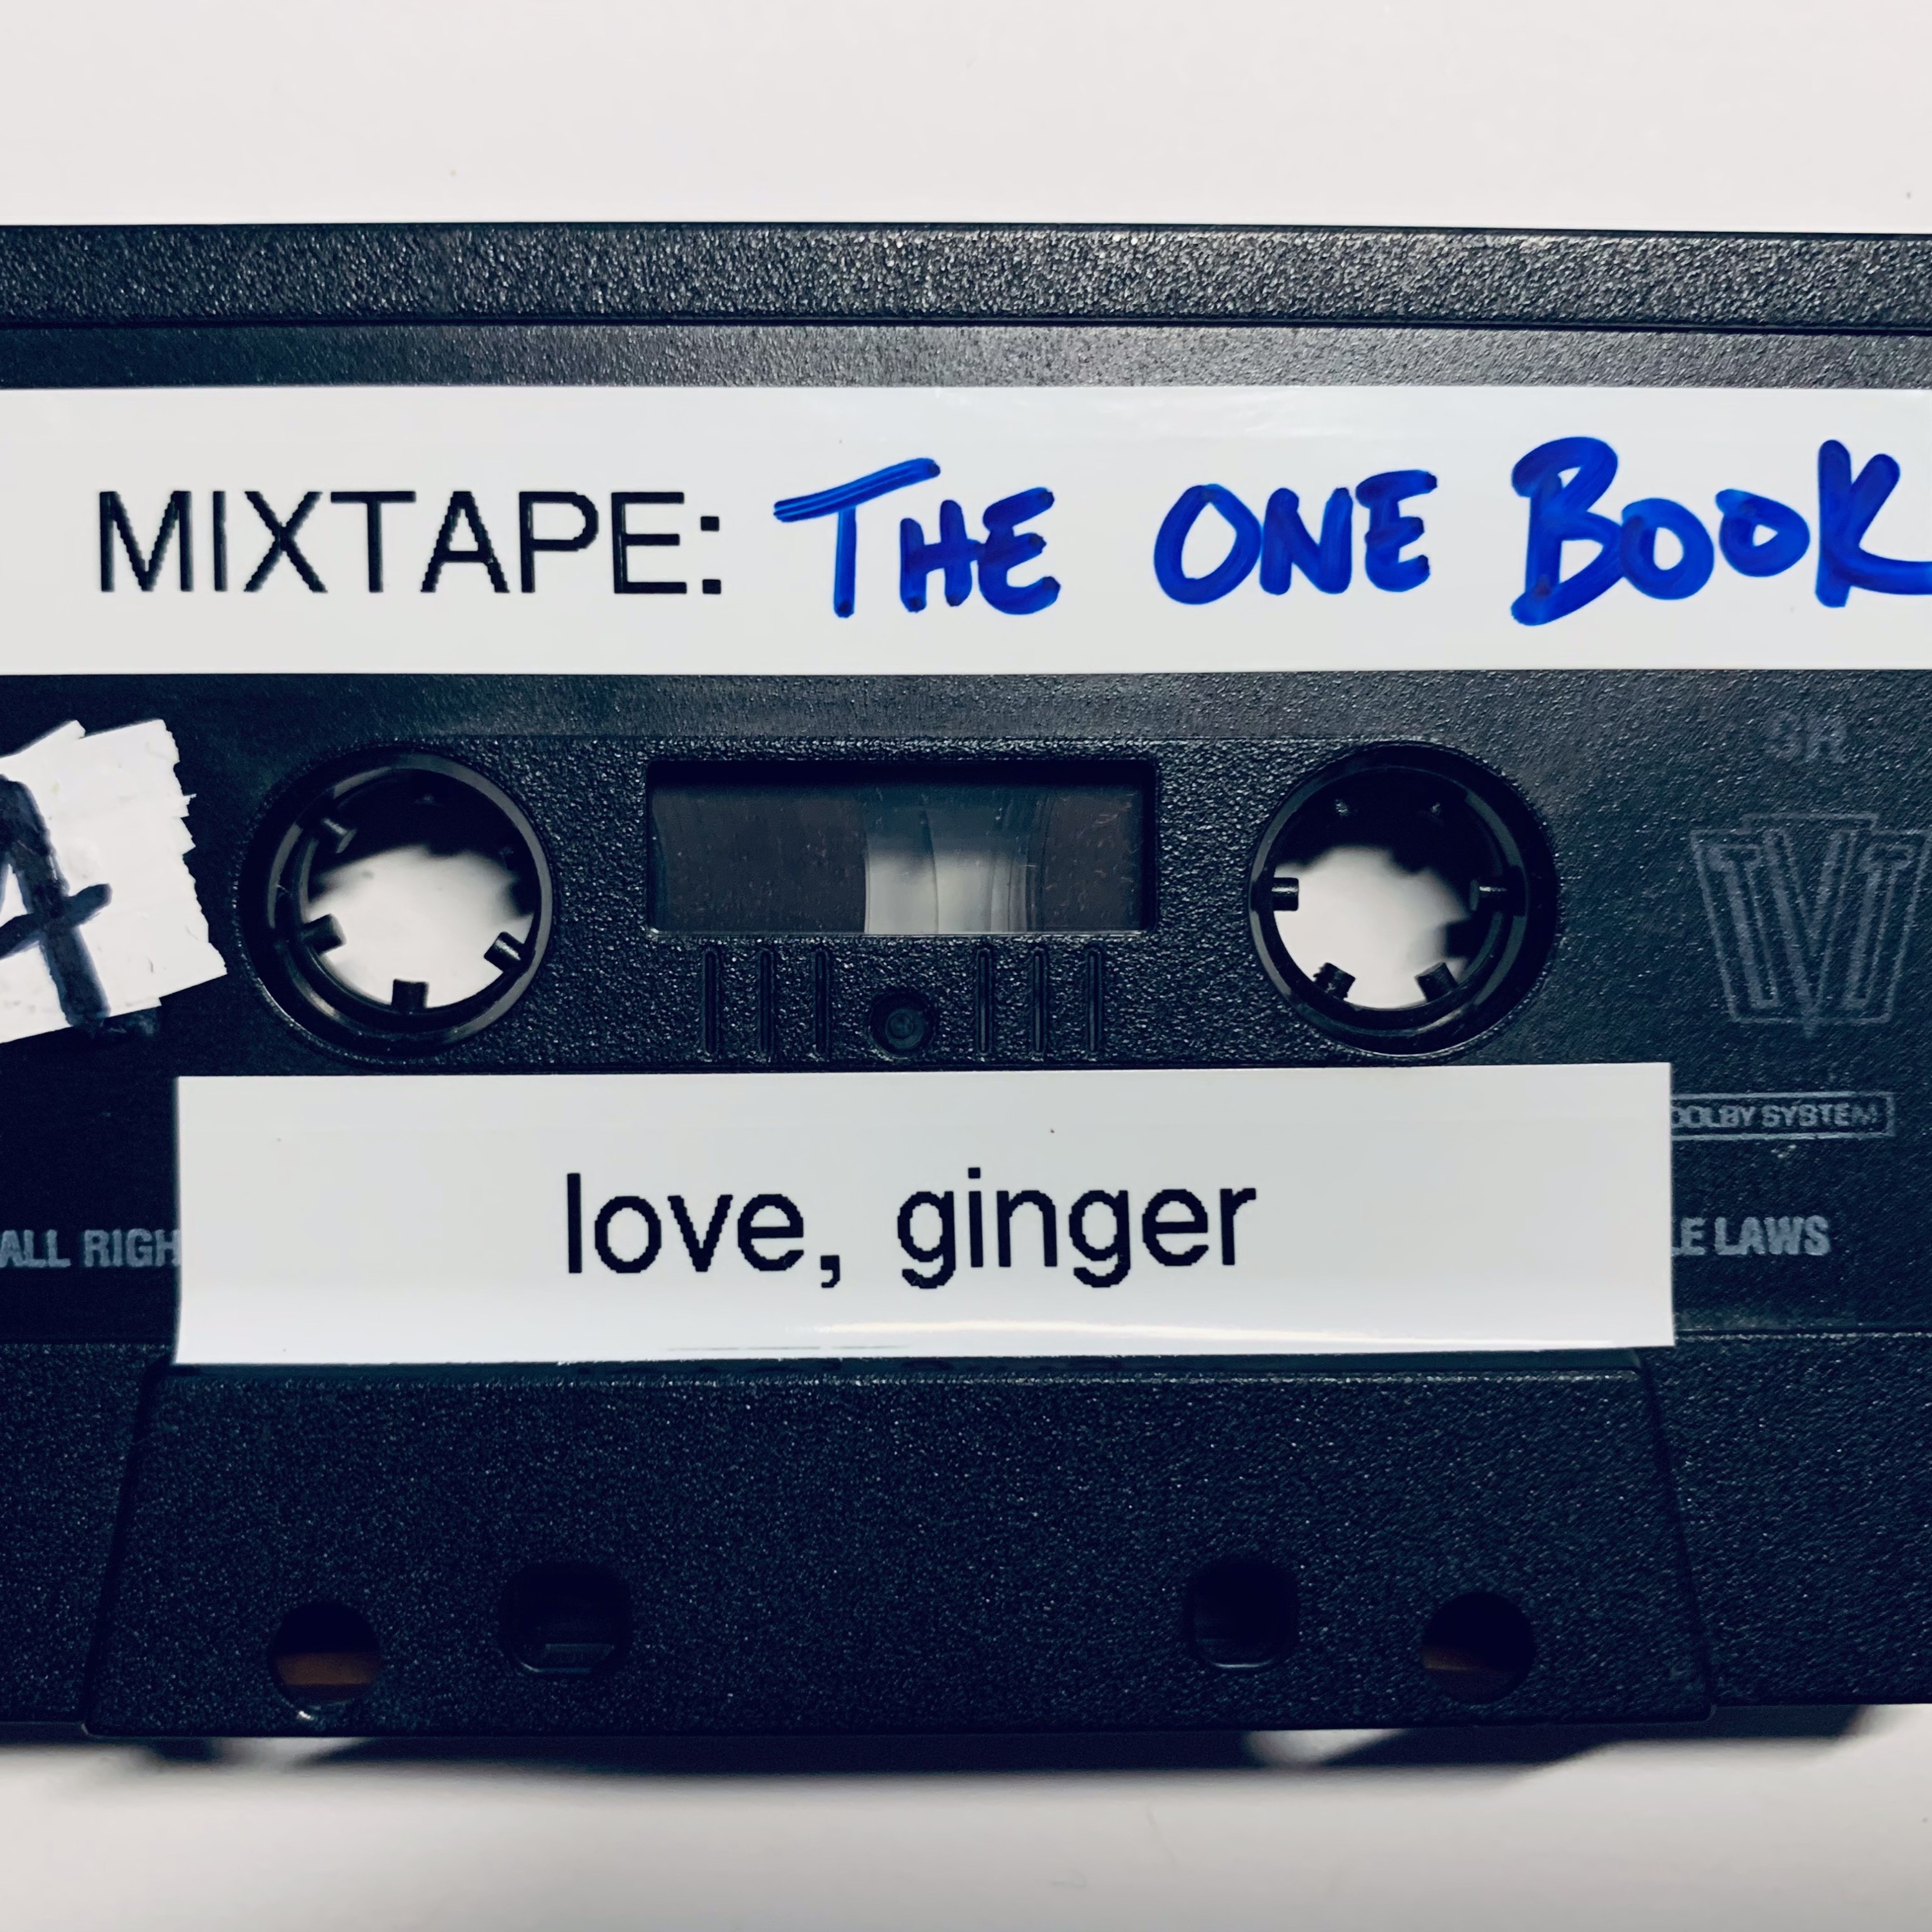 Mixtape: The One Book